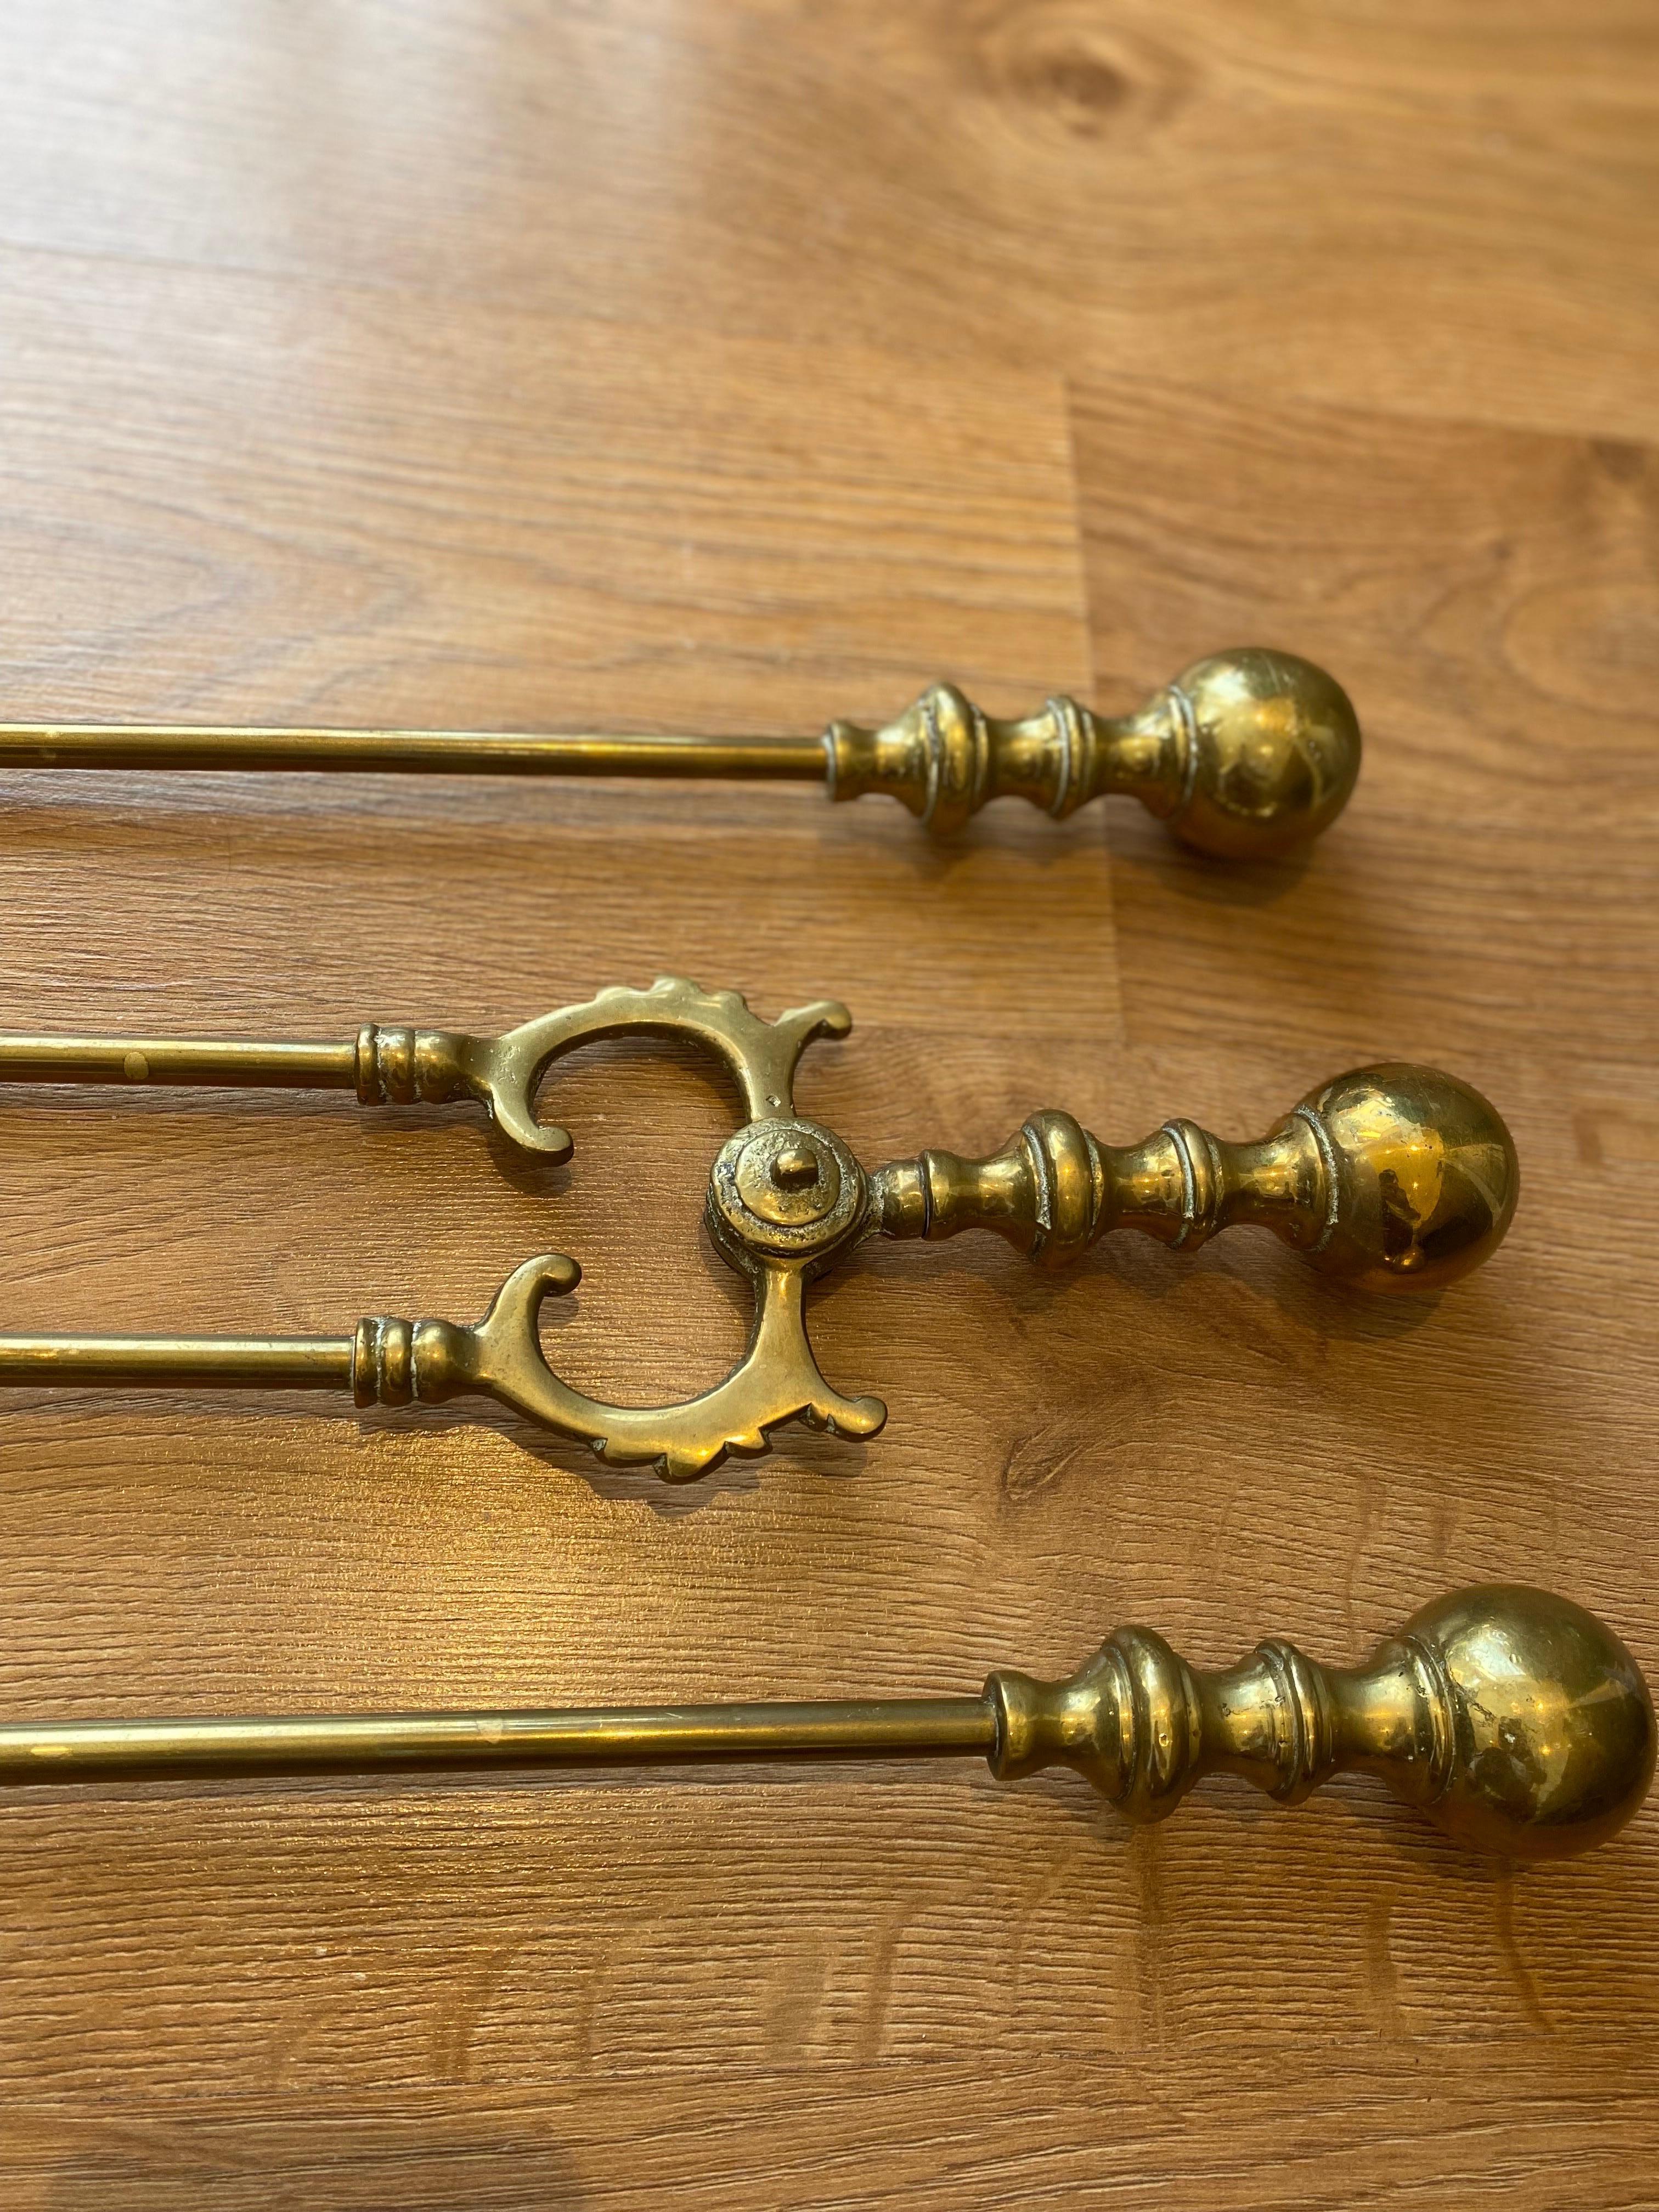 Victorian Gothic Brass Fire Companion Set, 19th Century For Sale 5